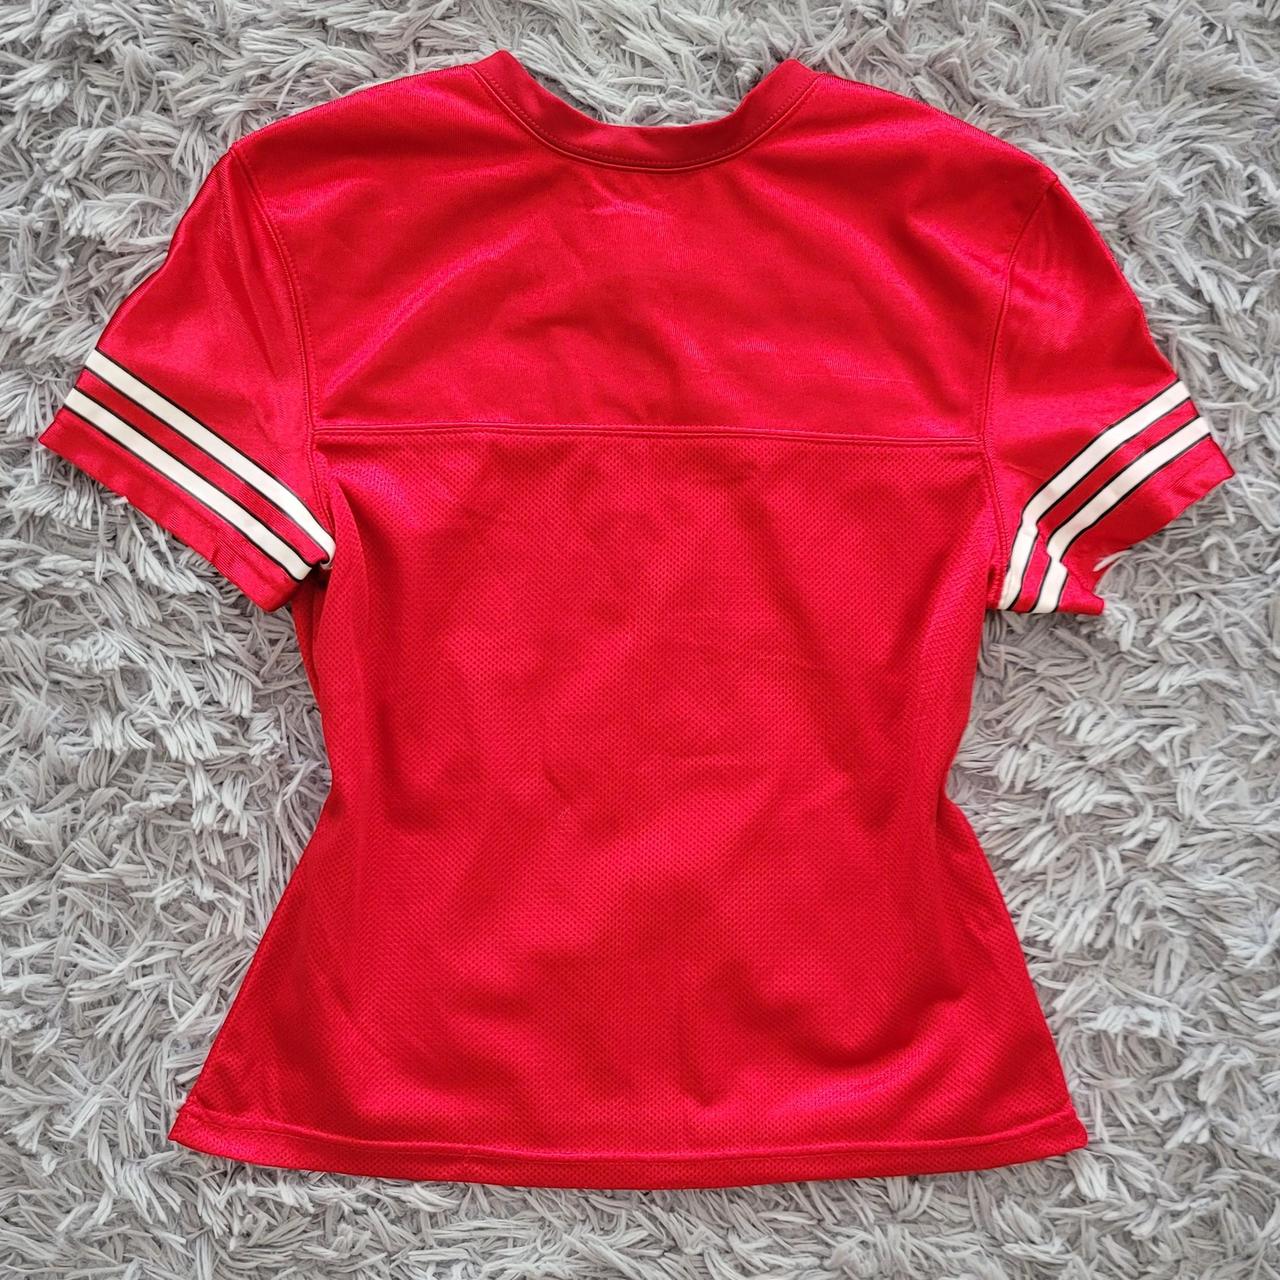 Women's Red and White T-shirt (2)